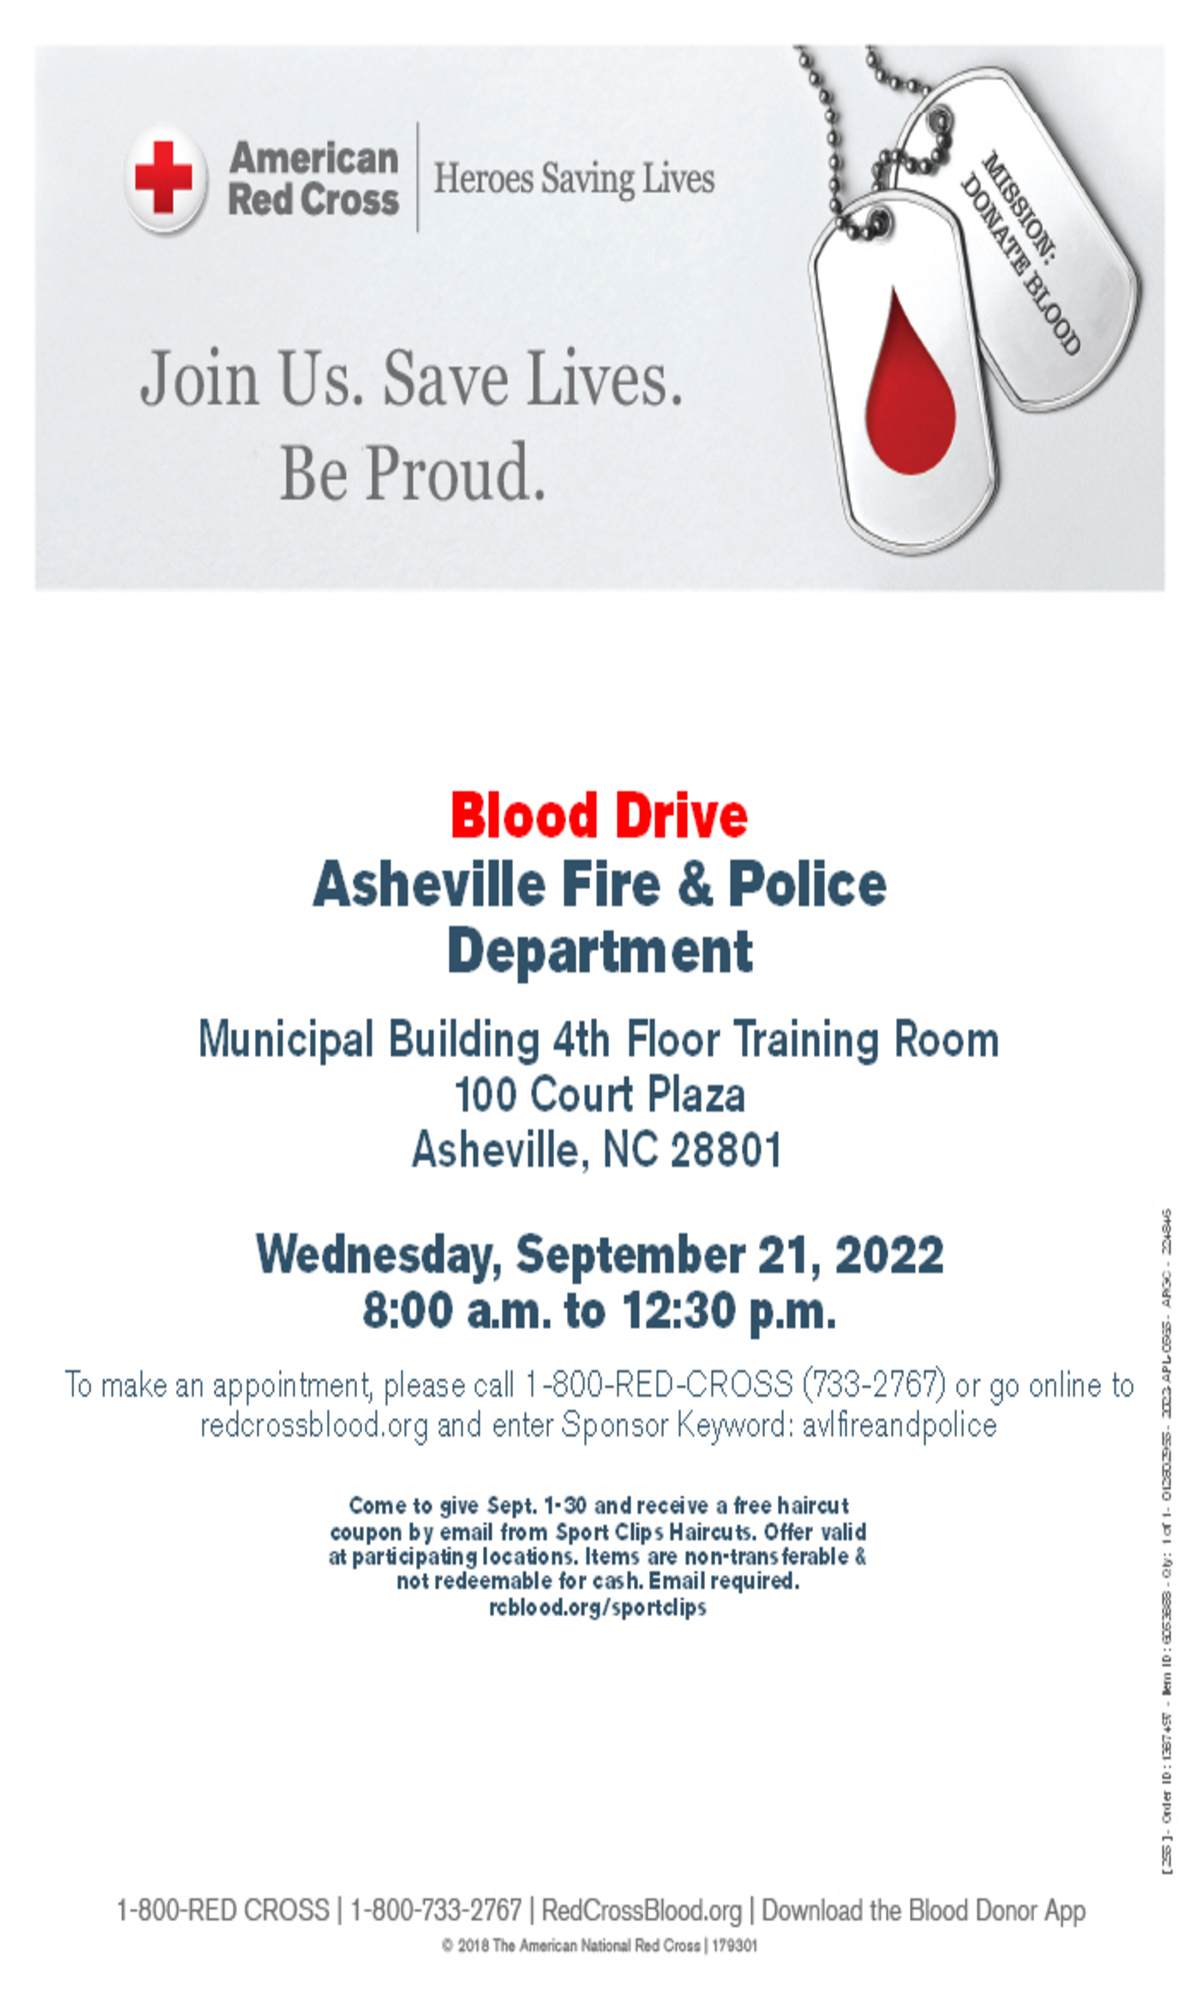 Asheville Fire and Police Departments to host Blood Drive